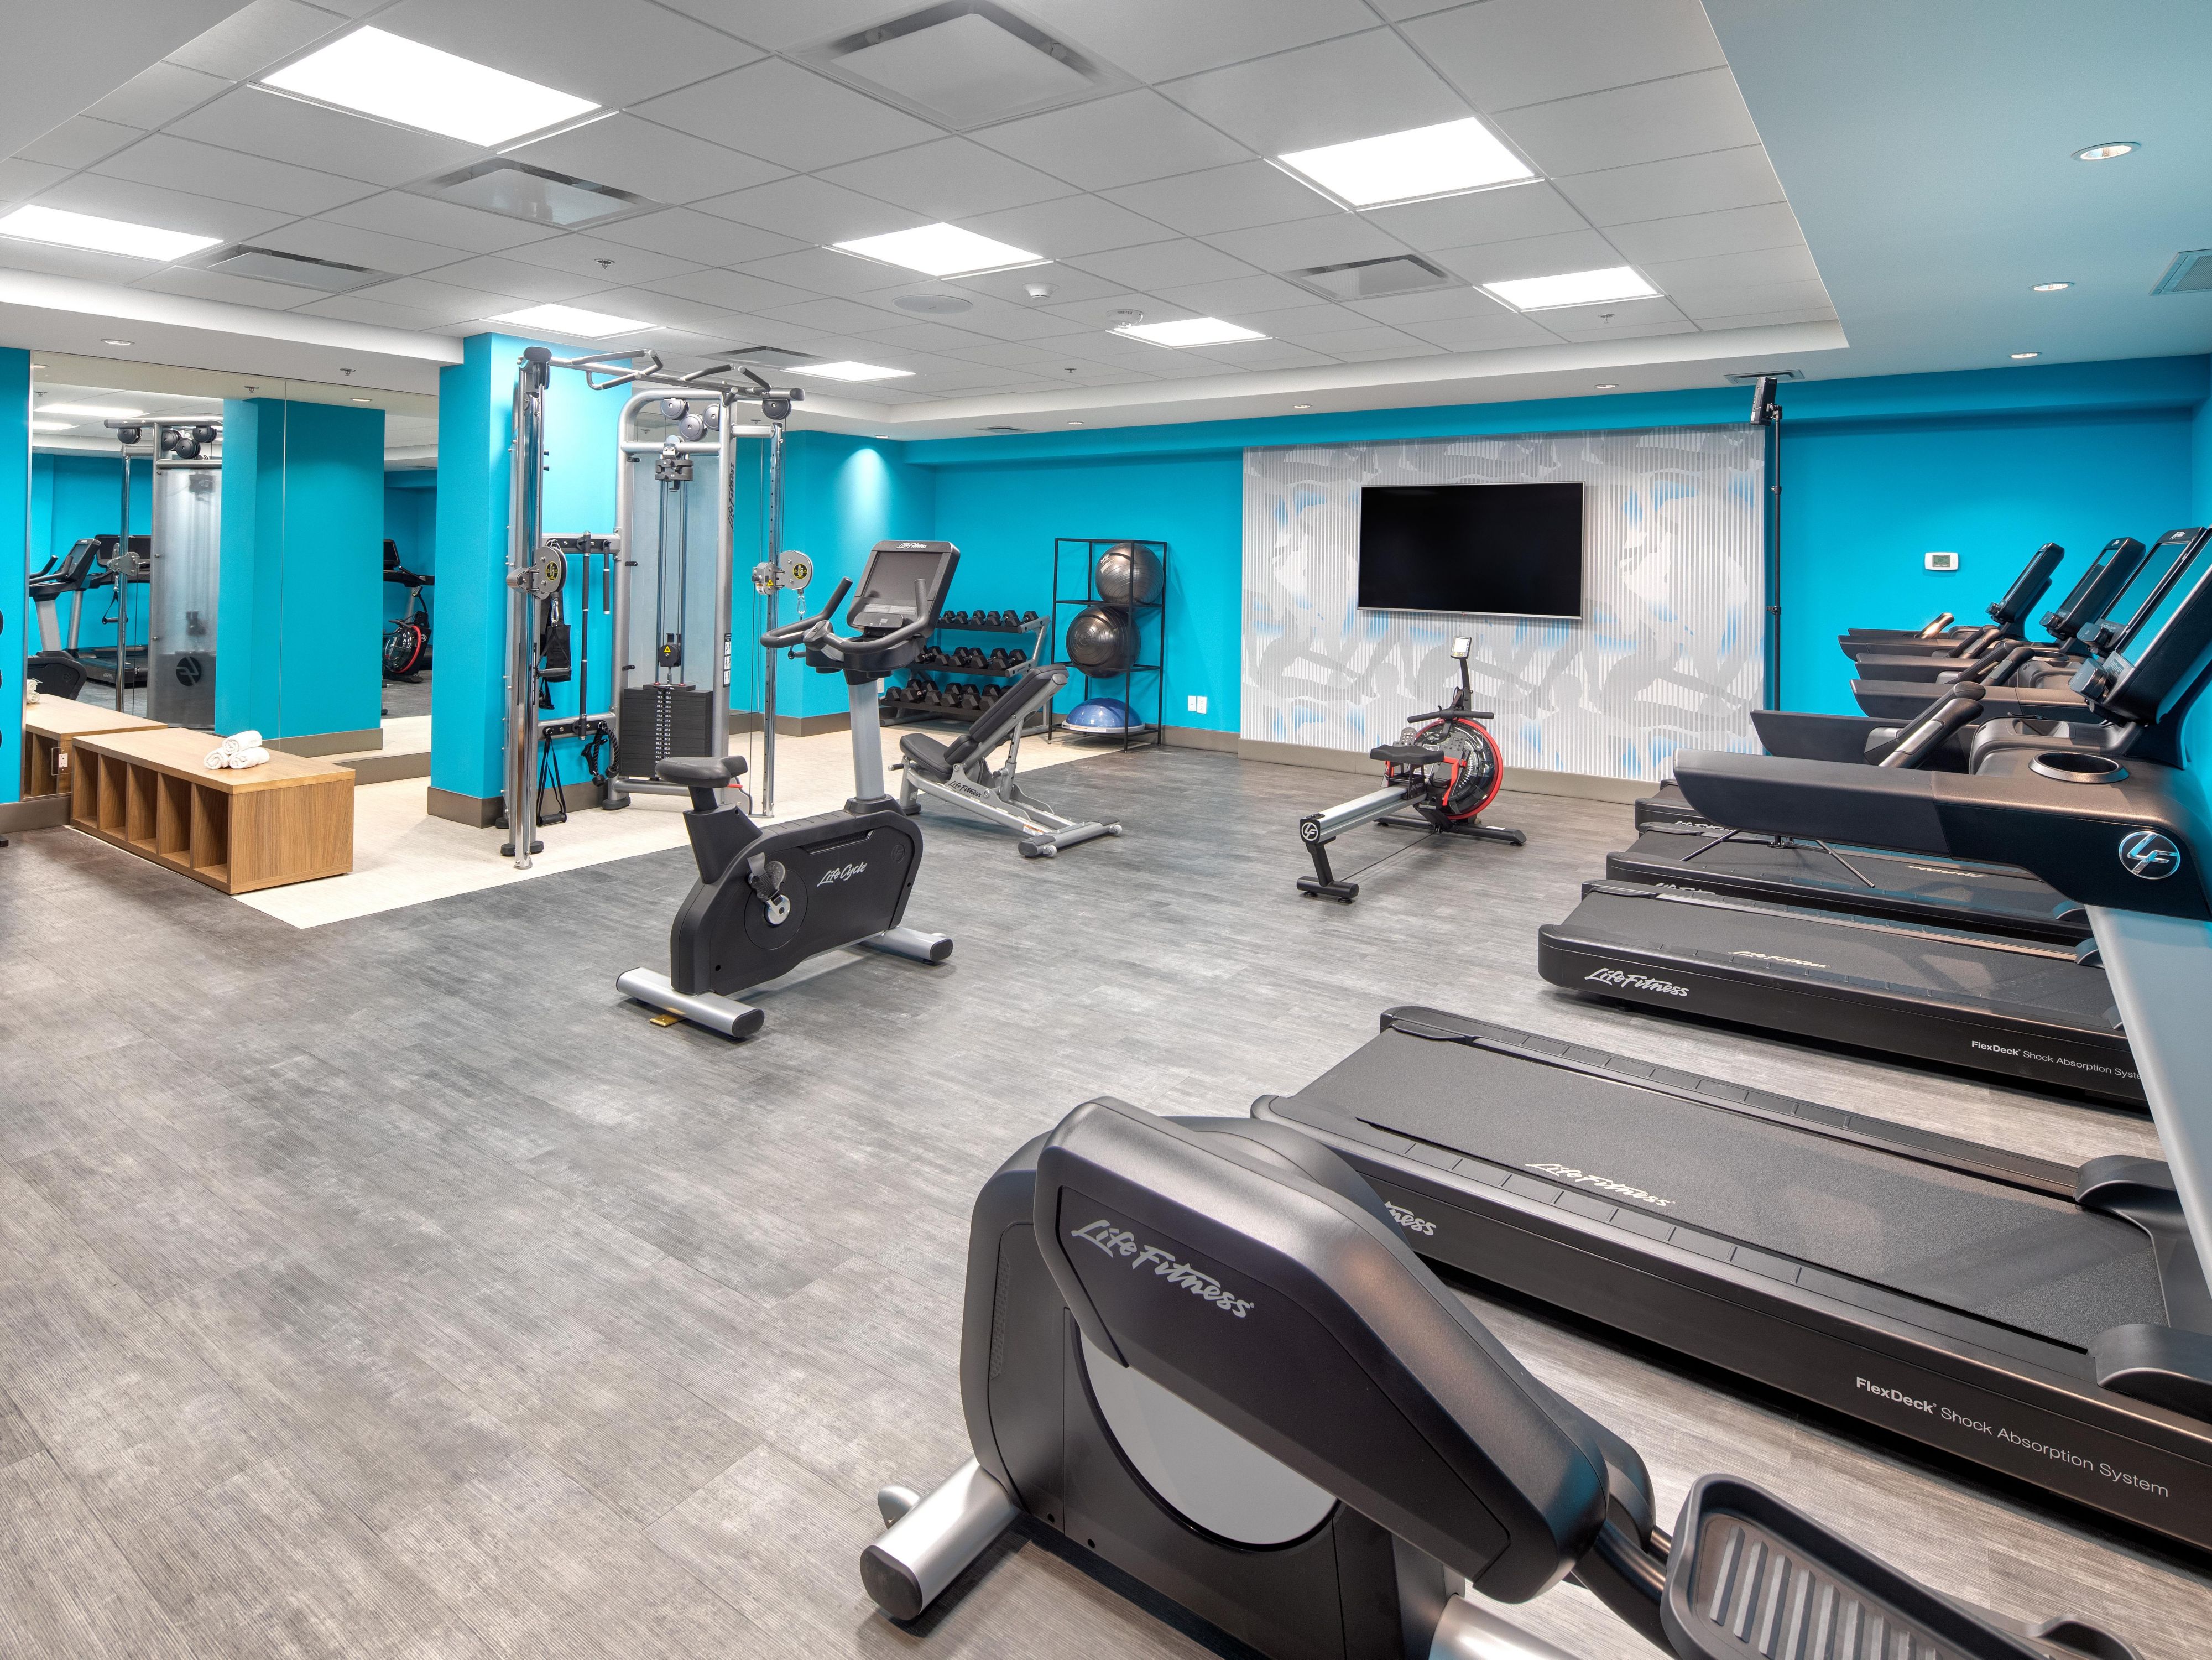 Our hotel's 24/7 Fitness Center lets you keep up with your workout routine while you're on the road. Our gym features all the equipment you need for productive, full-body workouts, including ellipticals, treadmills, stair climbers, and weight machines. Plus, there's a heated indoor pool where you can swim a few laps or just take a refreshing dip. 